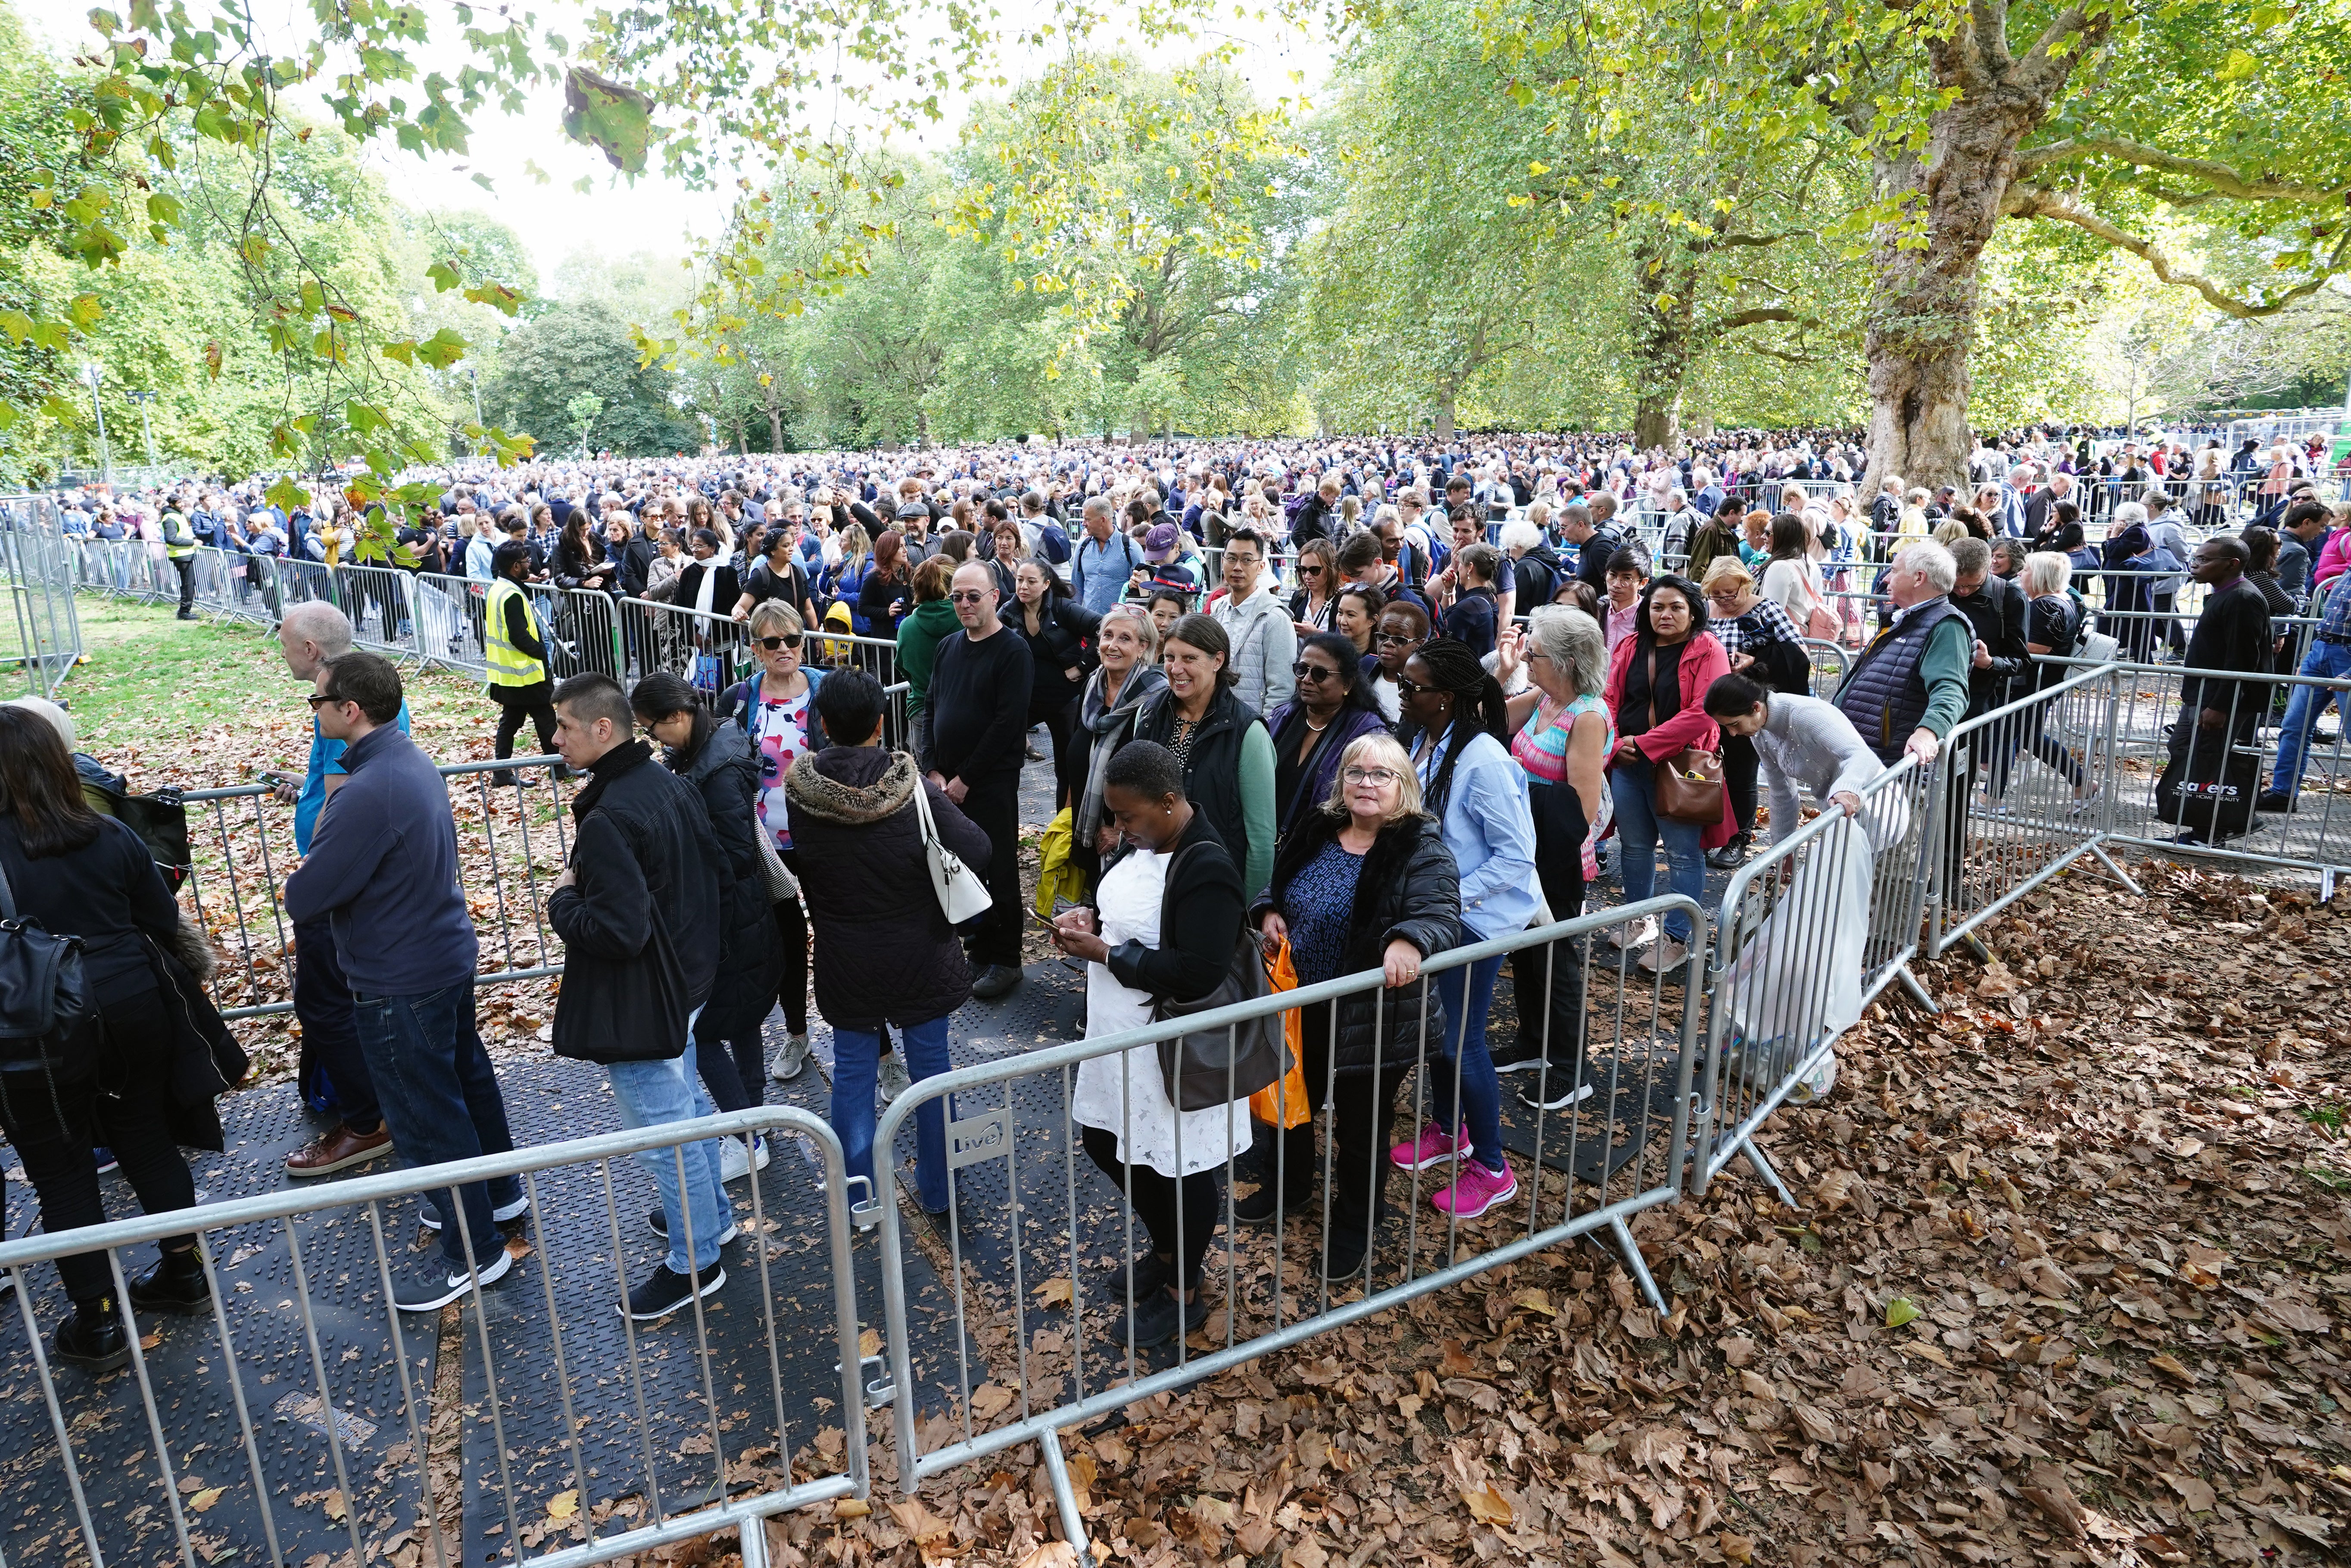 Members of the public in the queue at Southwark Park in London (Ian West/PA)